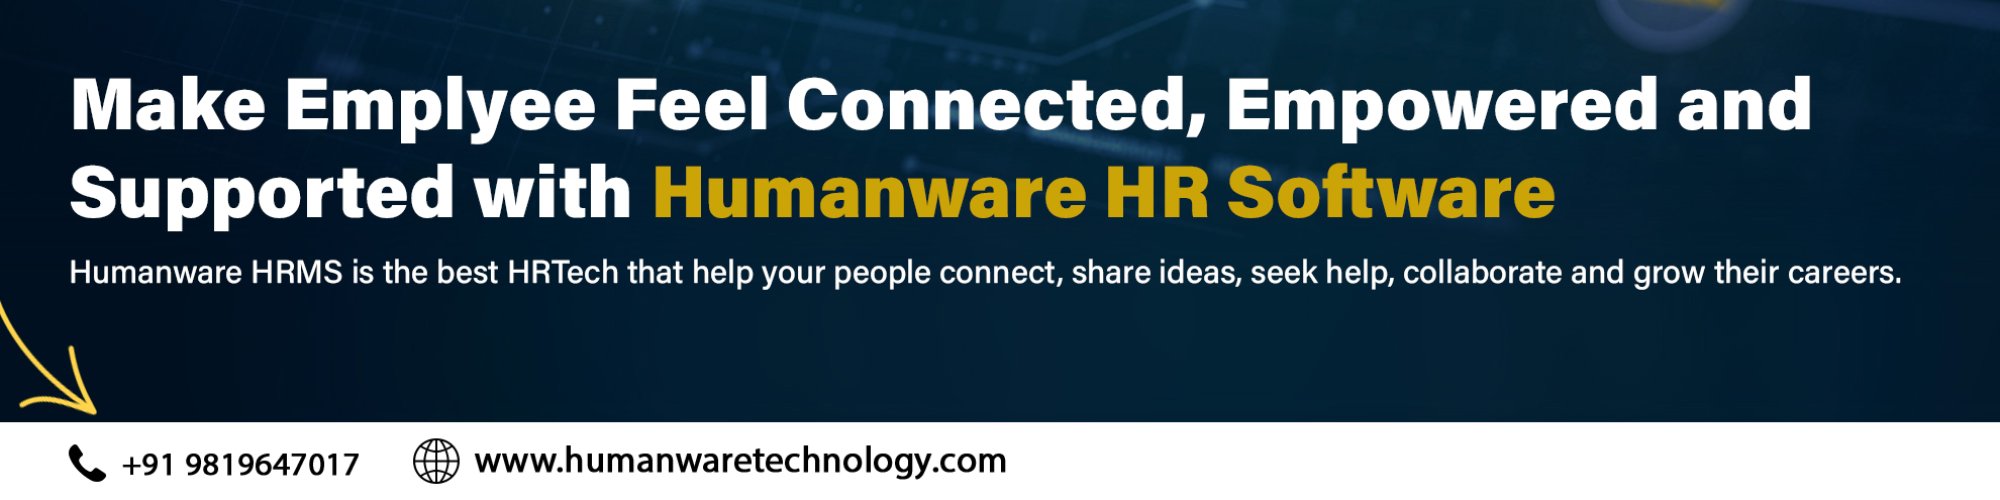 Humanware Solutions - HR Software Company